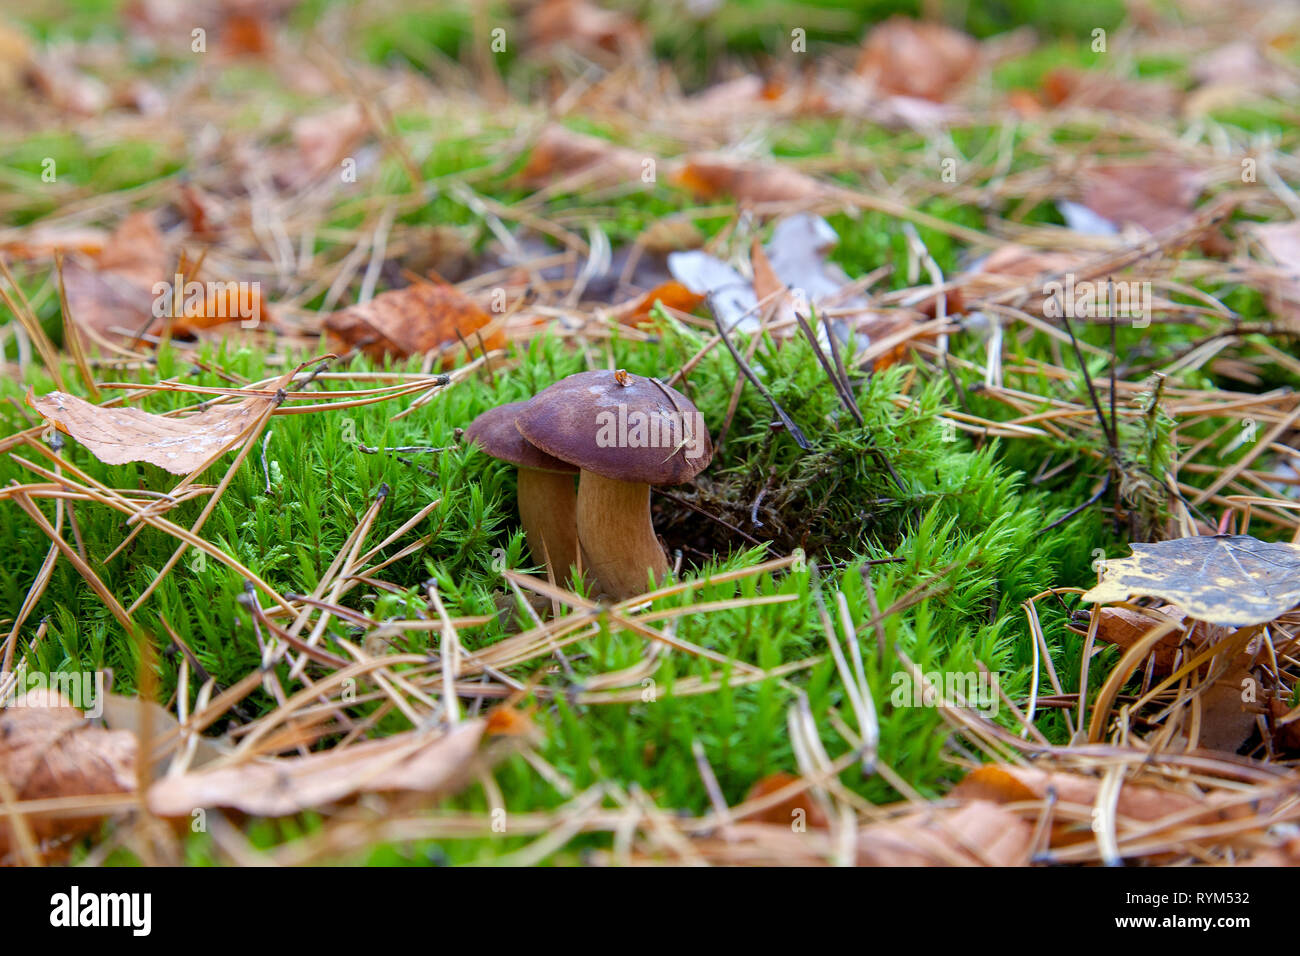 Edible wild mushroom with chestnut color cap growing among moss and pine needles in an autumn pine forest. Bay bolete  known as imleria badia or bolet Stock Photo